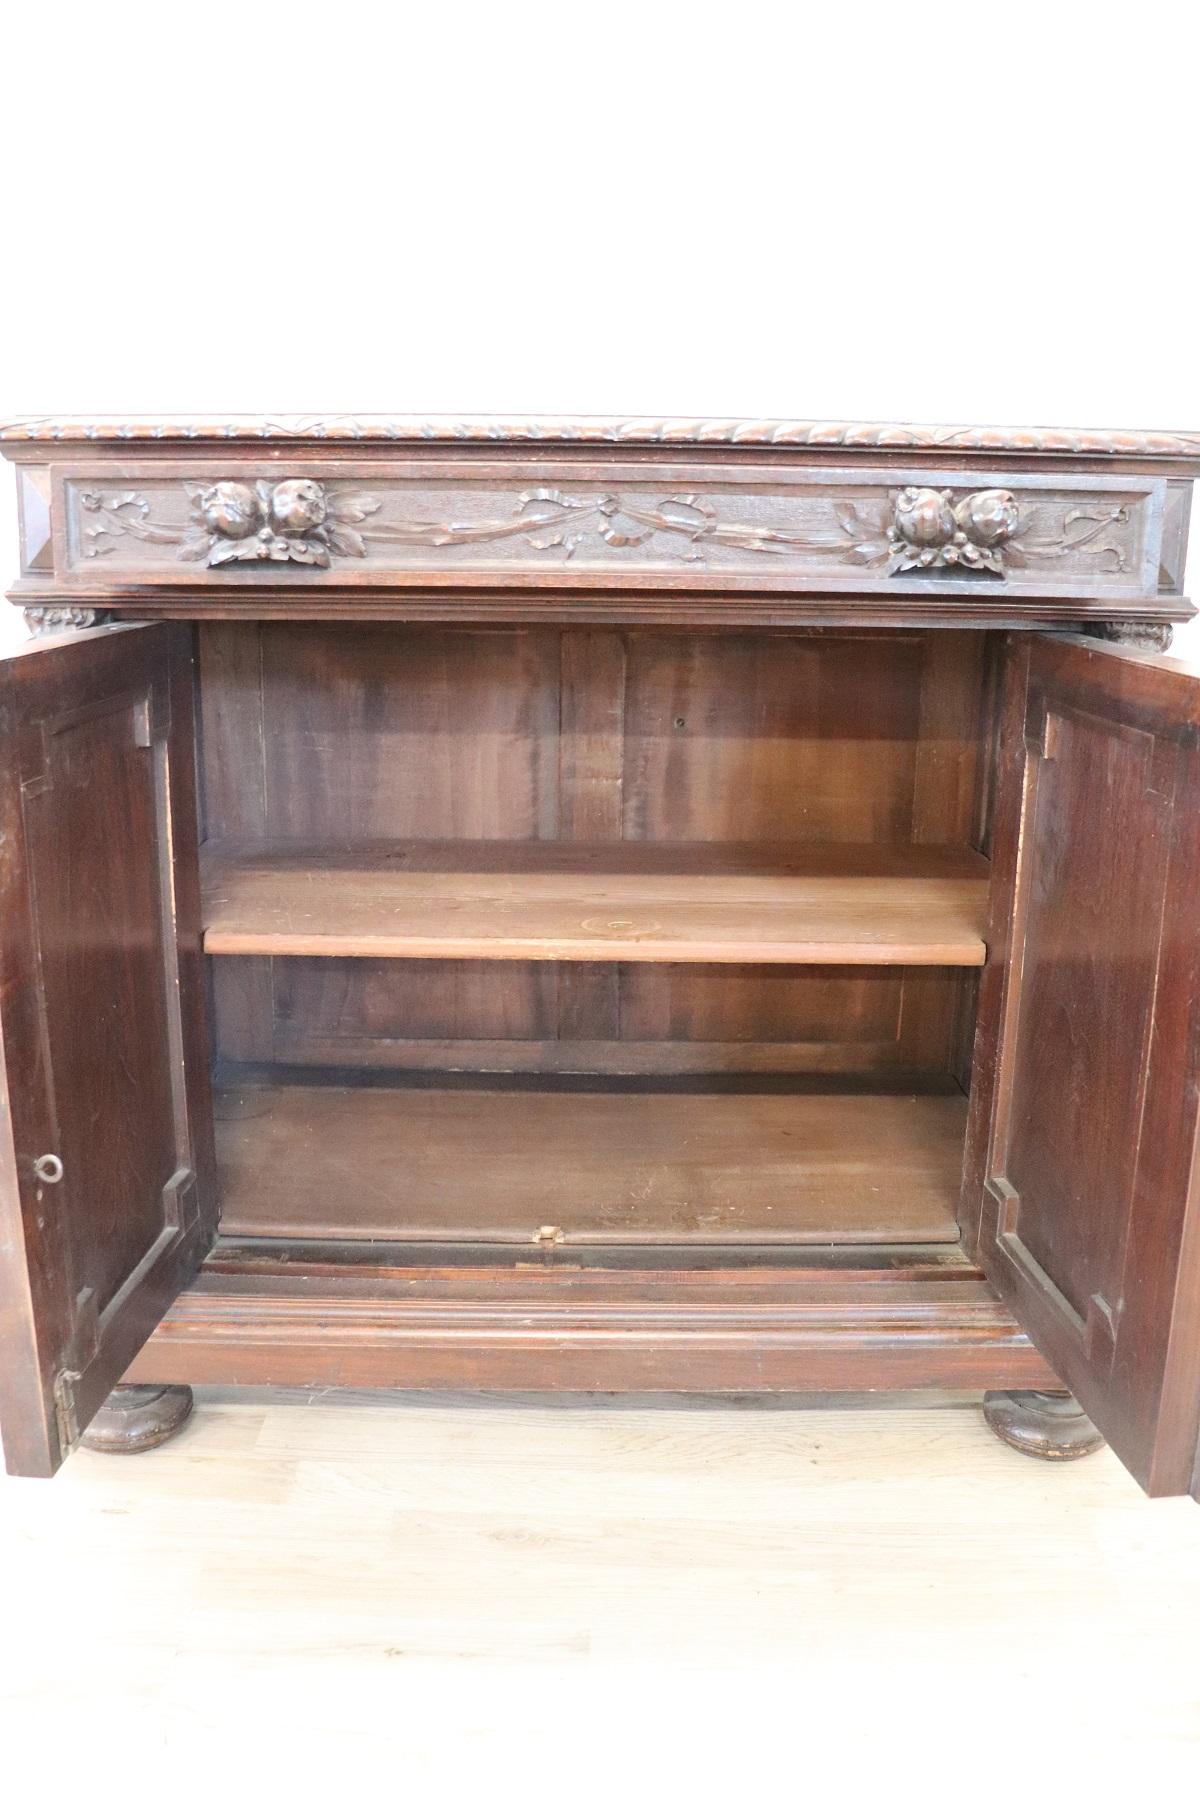 19th Century Italian Renaissance Style Carved Walnut Sideboard or Buffet 5